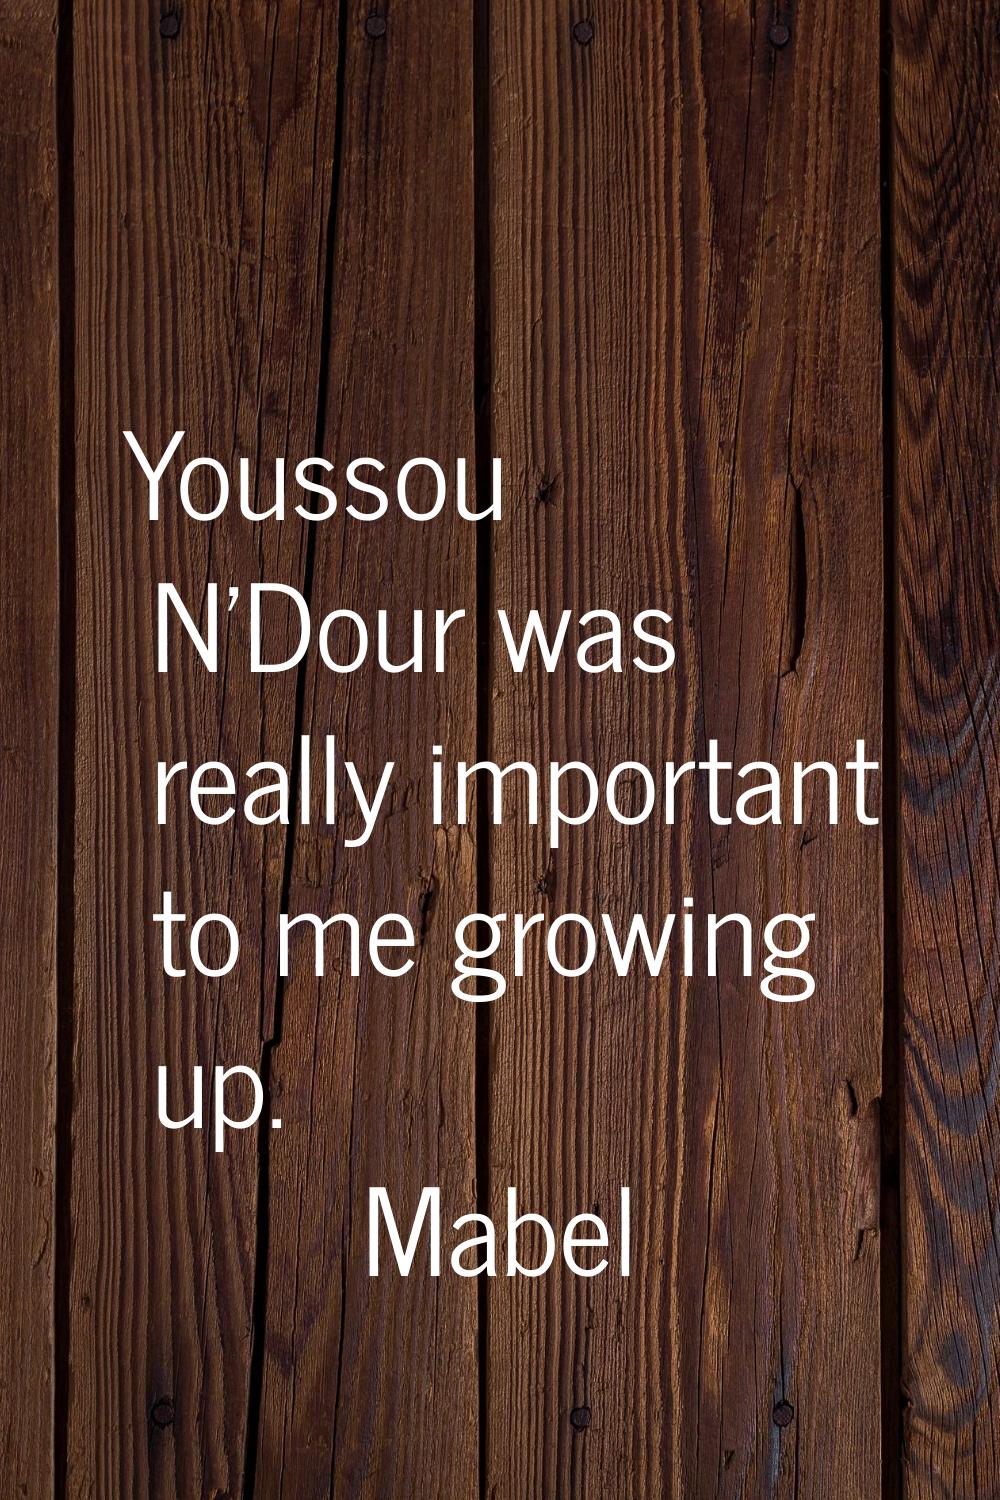 Youssou N'Dour was really important to me growing up.